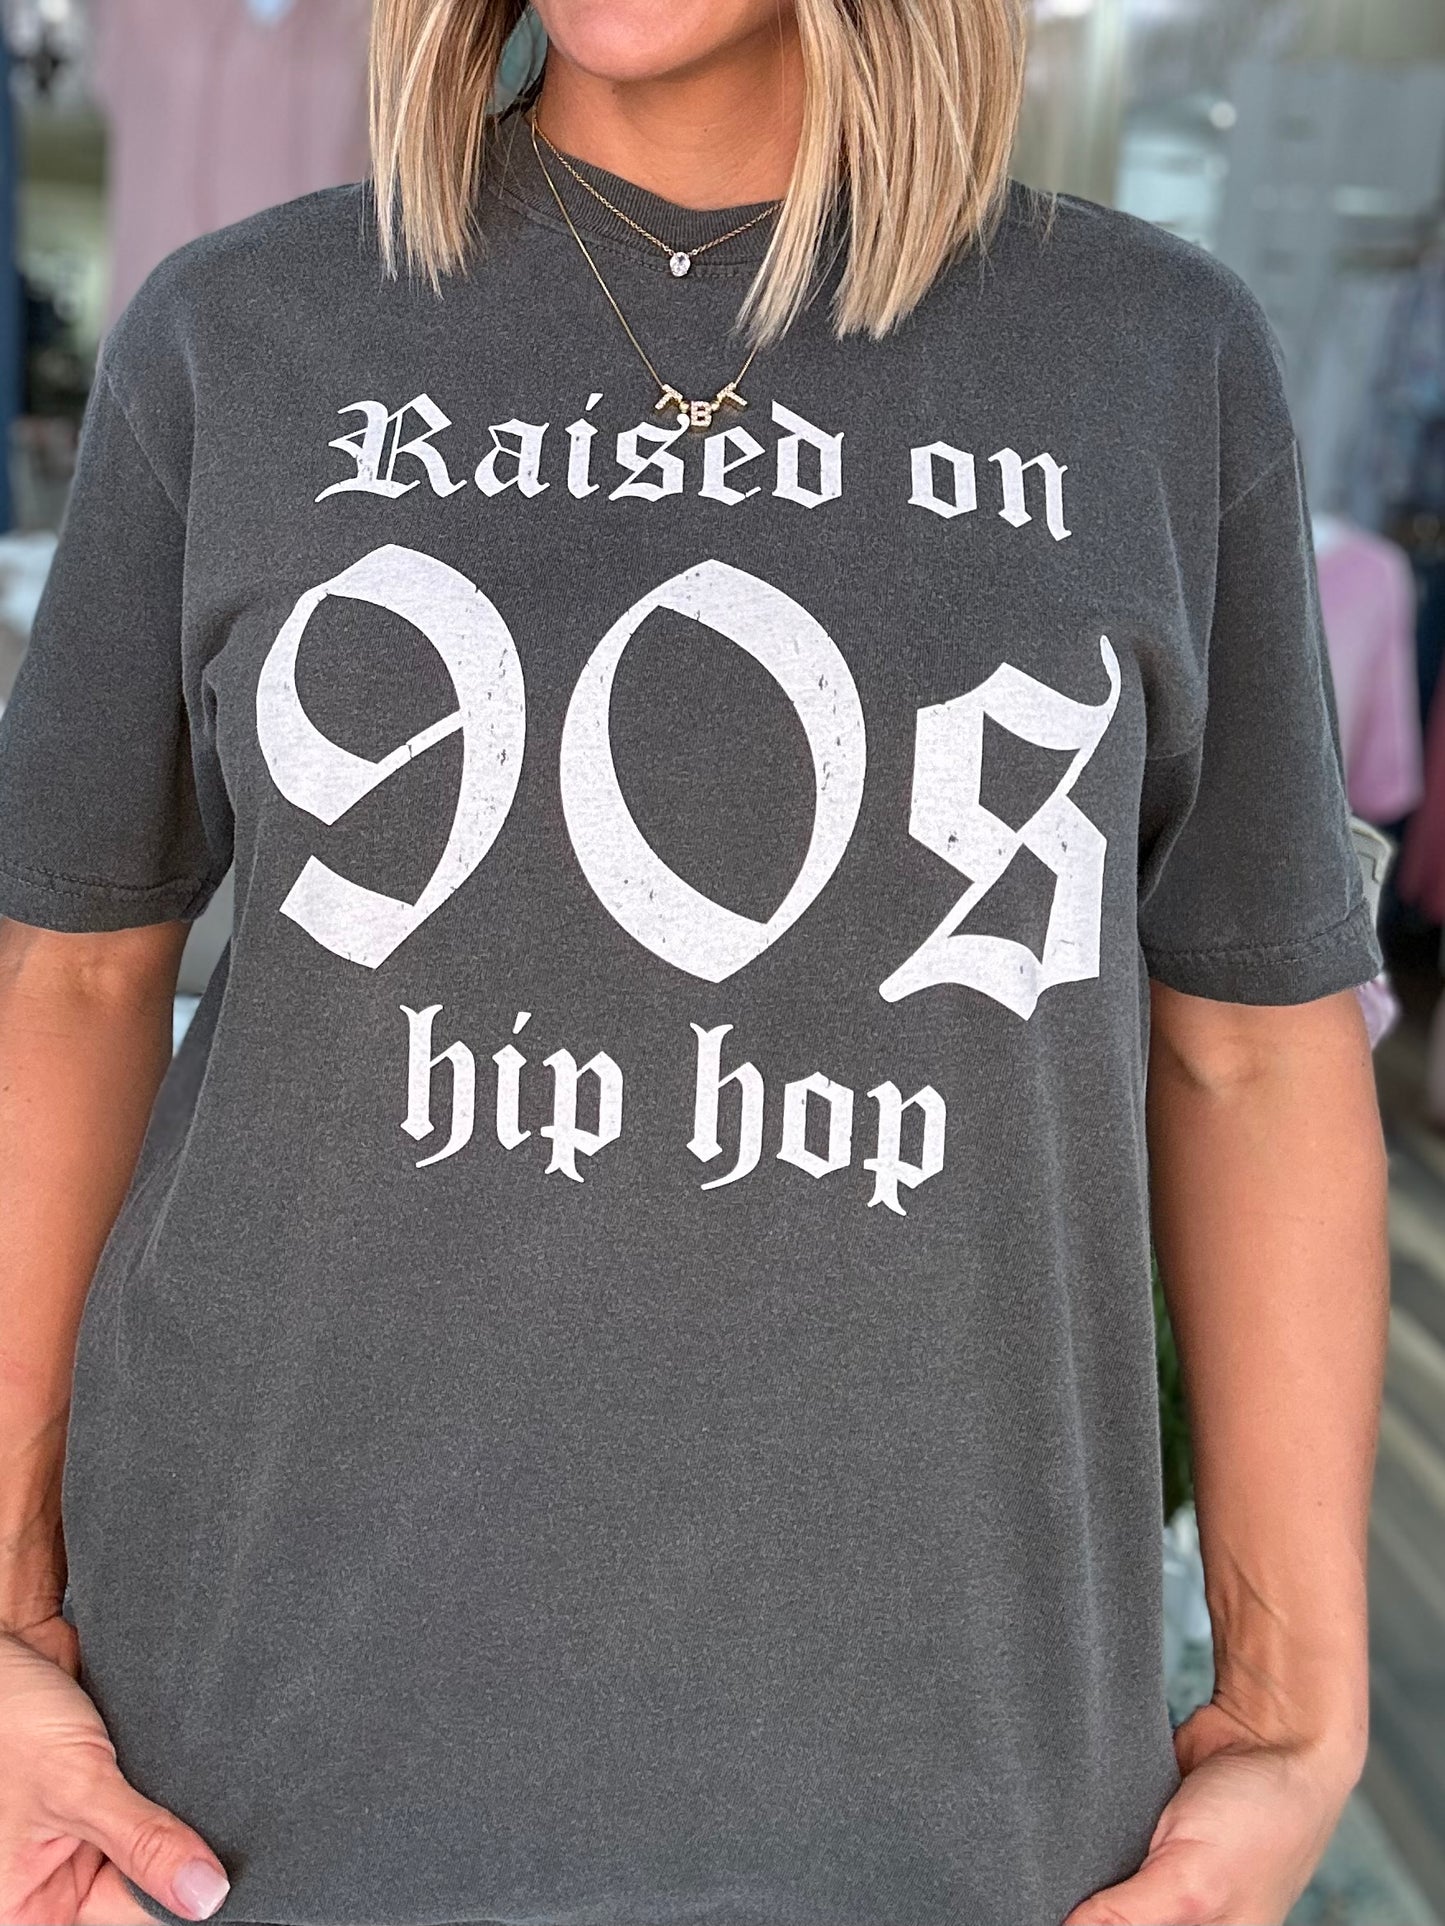 NEW! Raised on 90s Hip Hop tee in charcoal